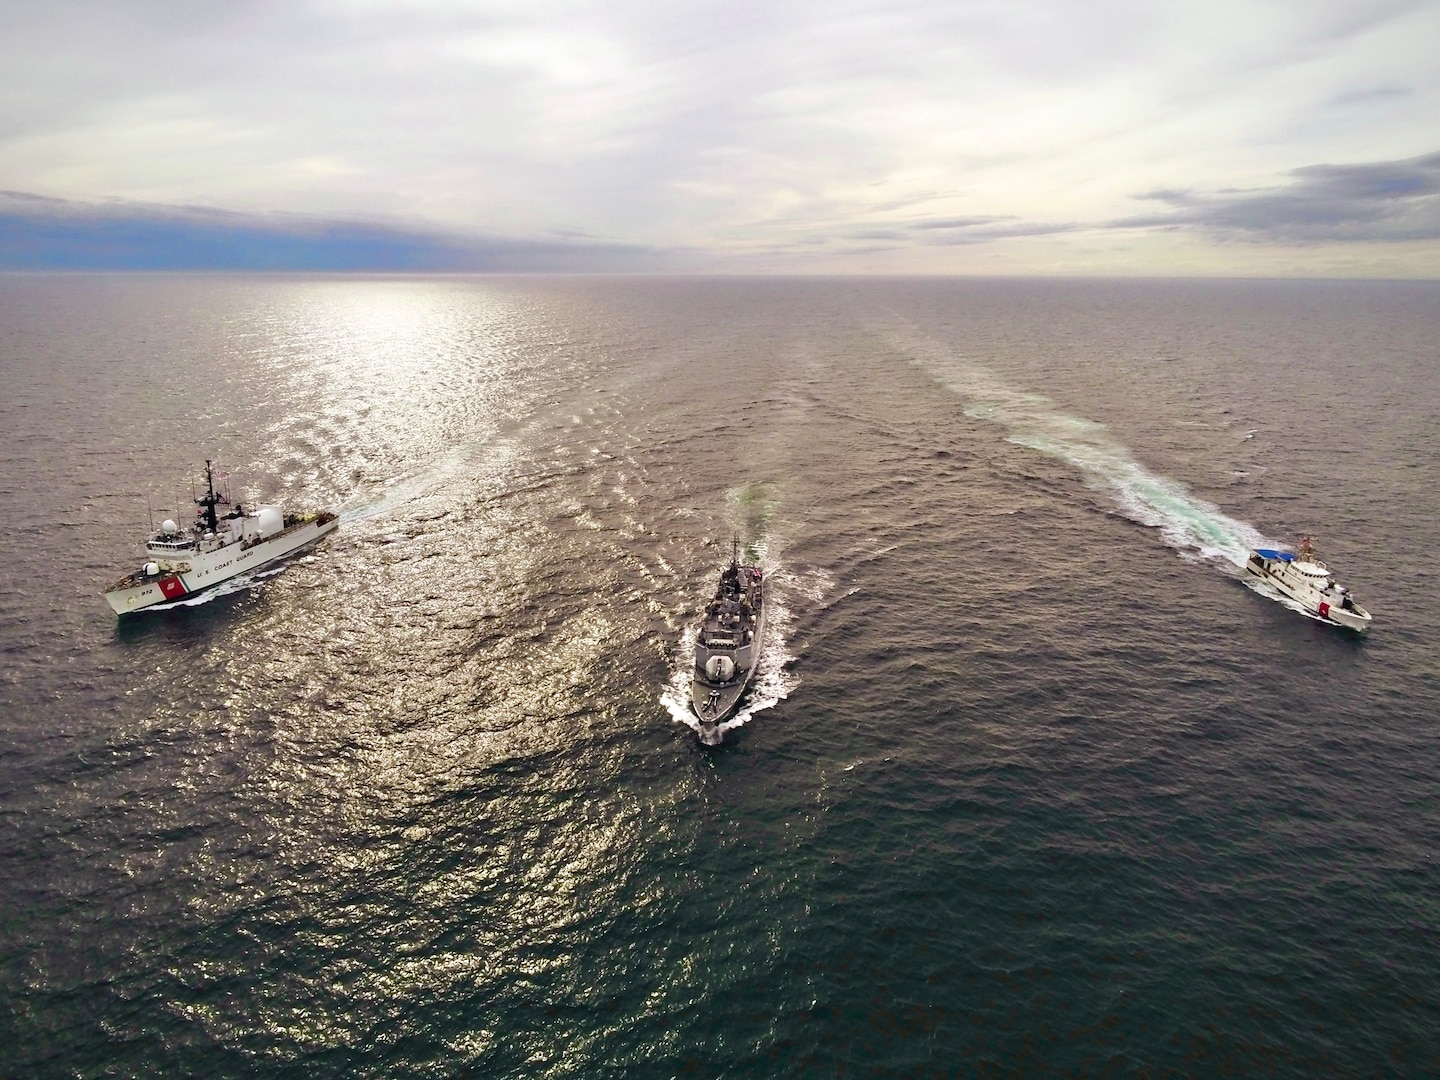 The Coast Guard Cutter Legare (WMEC 912) conducts joint training evolutions with the U.S. Coast Guard Cutter Maurice Jester (WPC 1152), and the French naval ship Premier-Maître L’Her (F792), off the coast of Long Island, New York, on March 16, 2024. Legare worked with Premier-Maître L’Her for a series of engagements and exercises designed to demonstrate interoperability with a critical NATO partner.